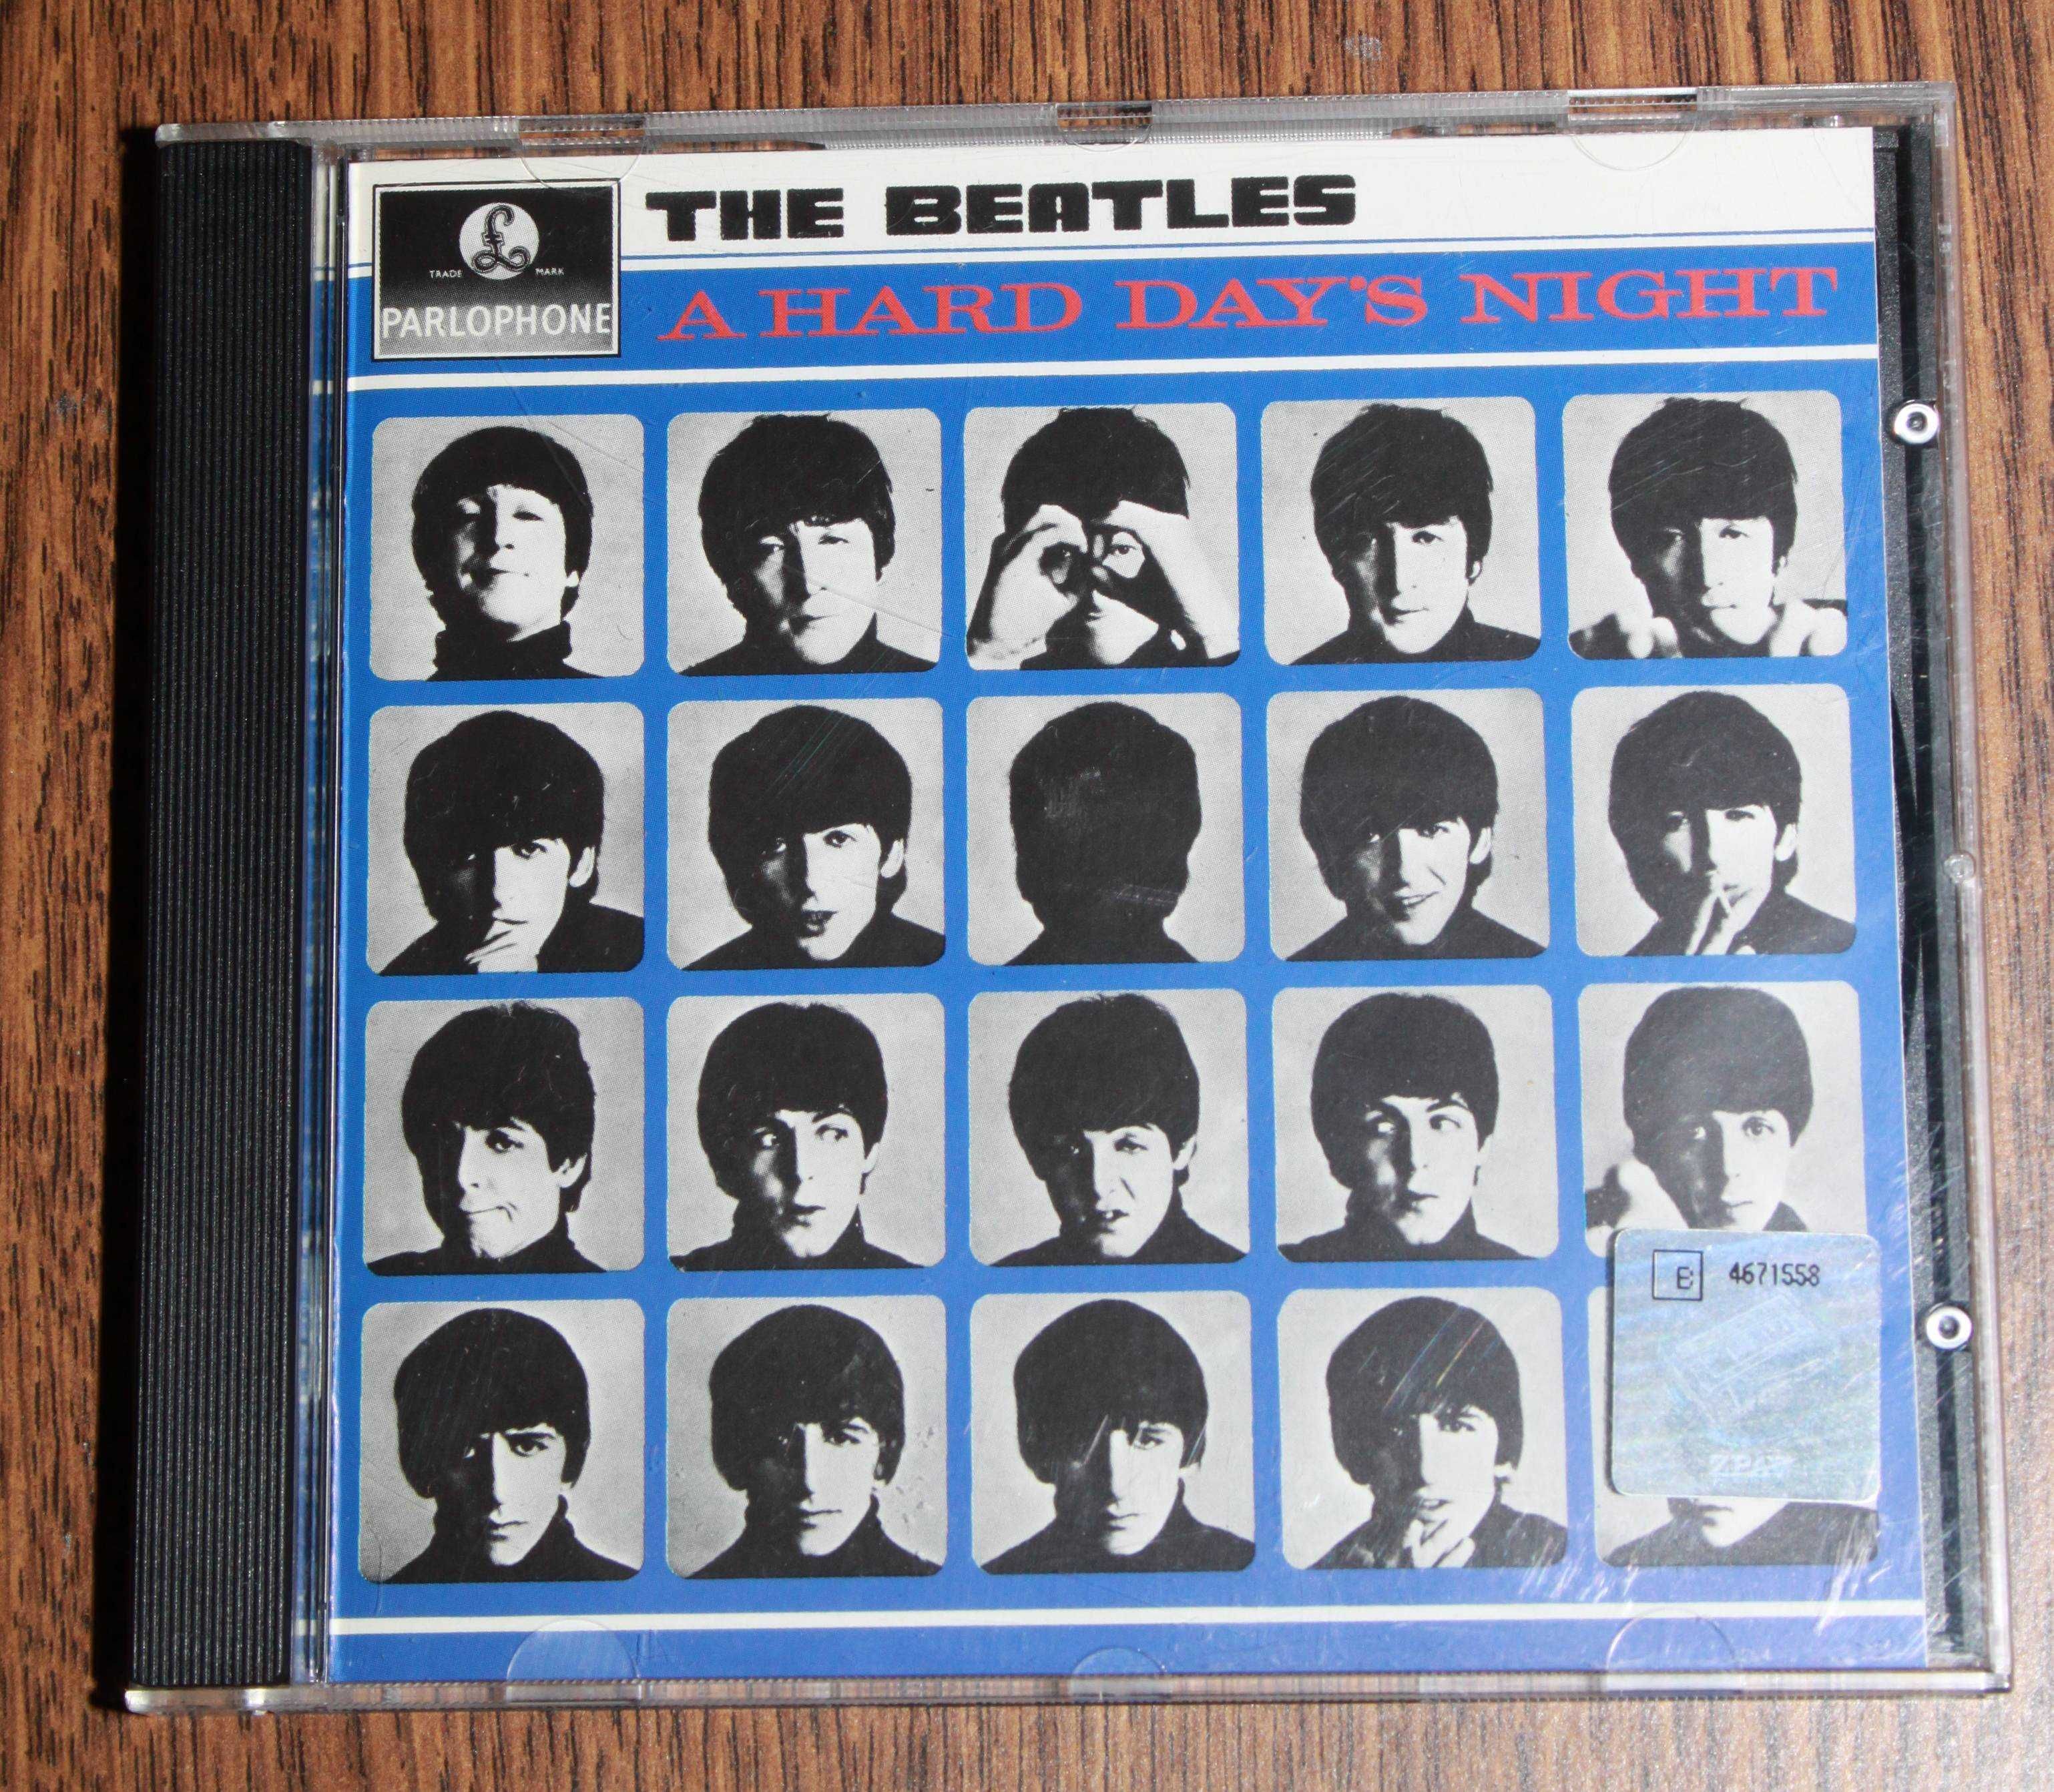 The Beatles – A Hard Day's Night (CD)